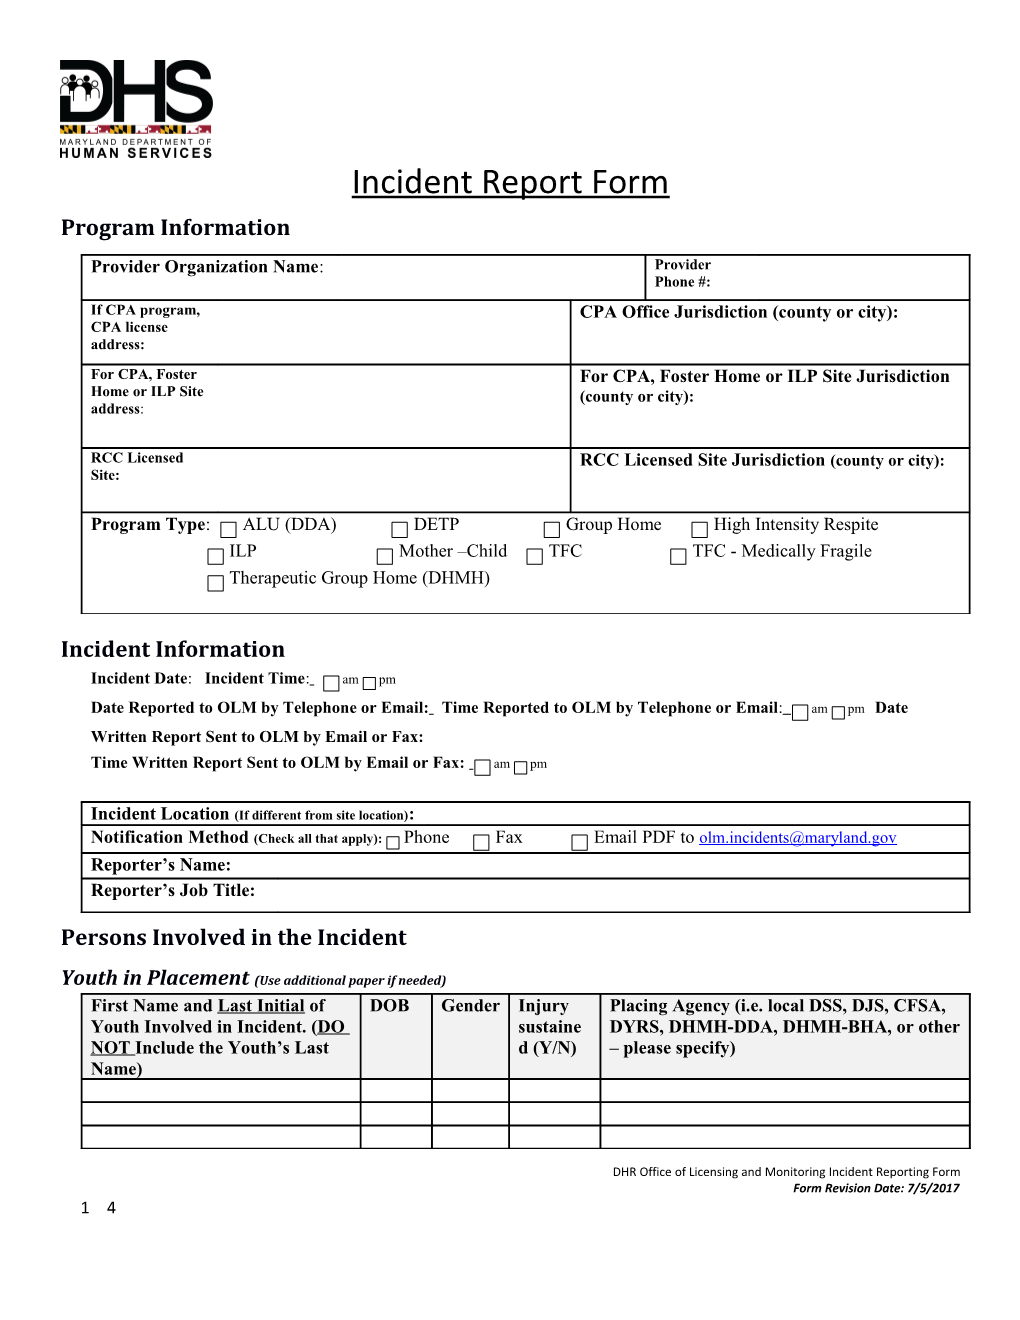 Incident Report Form s2